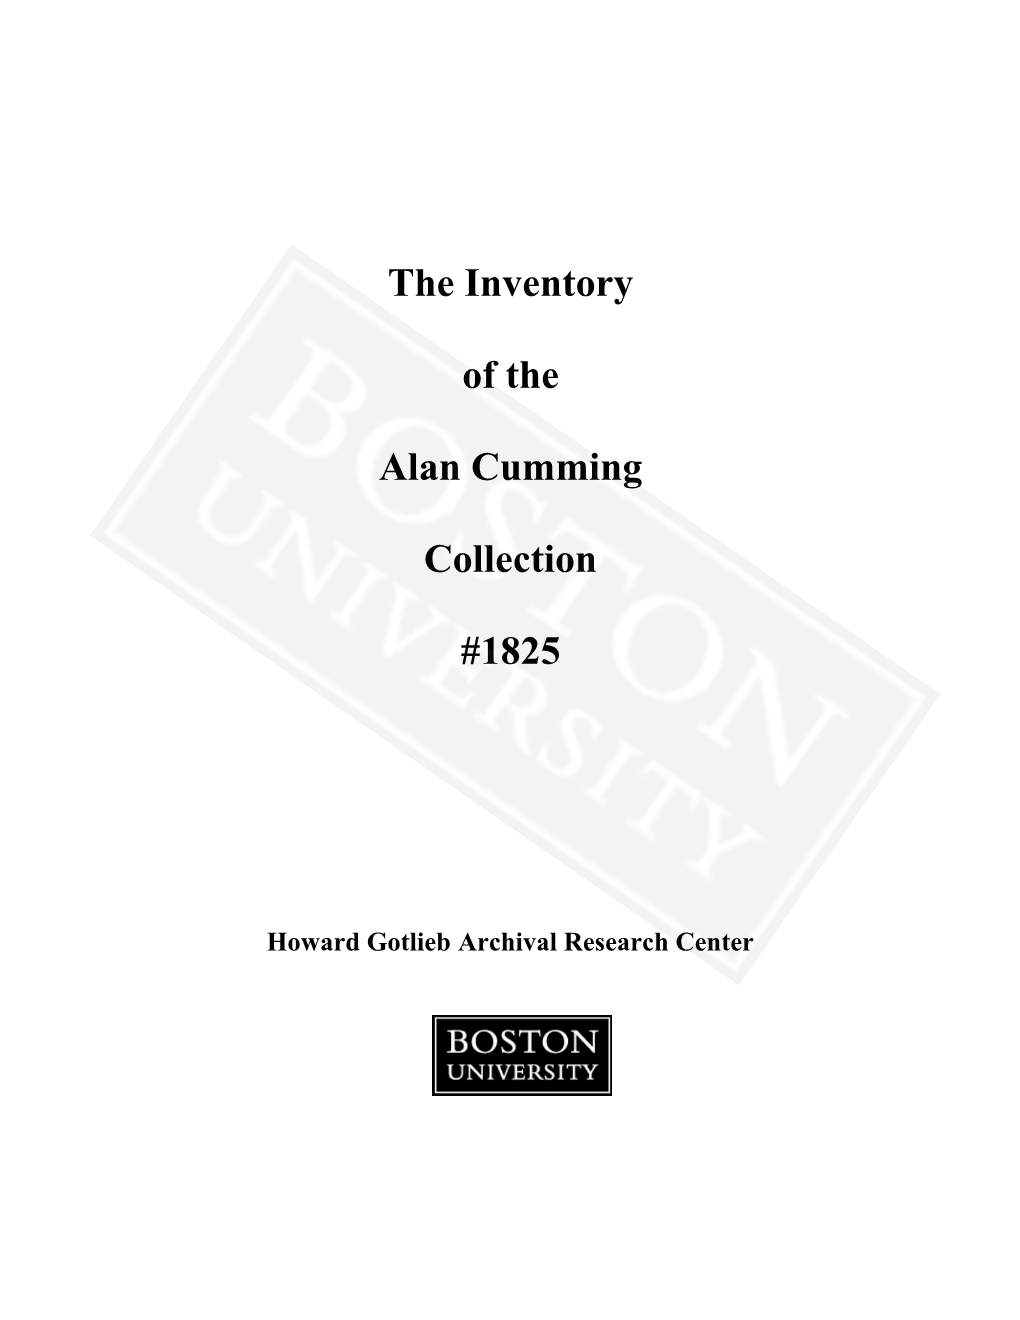 The Inventory of the Alan Cumming Collection #1825